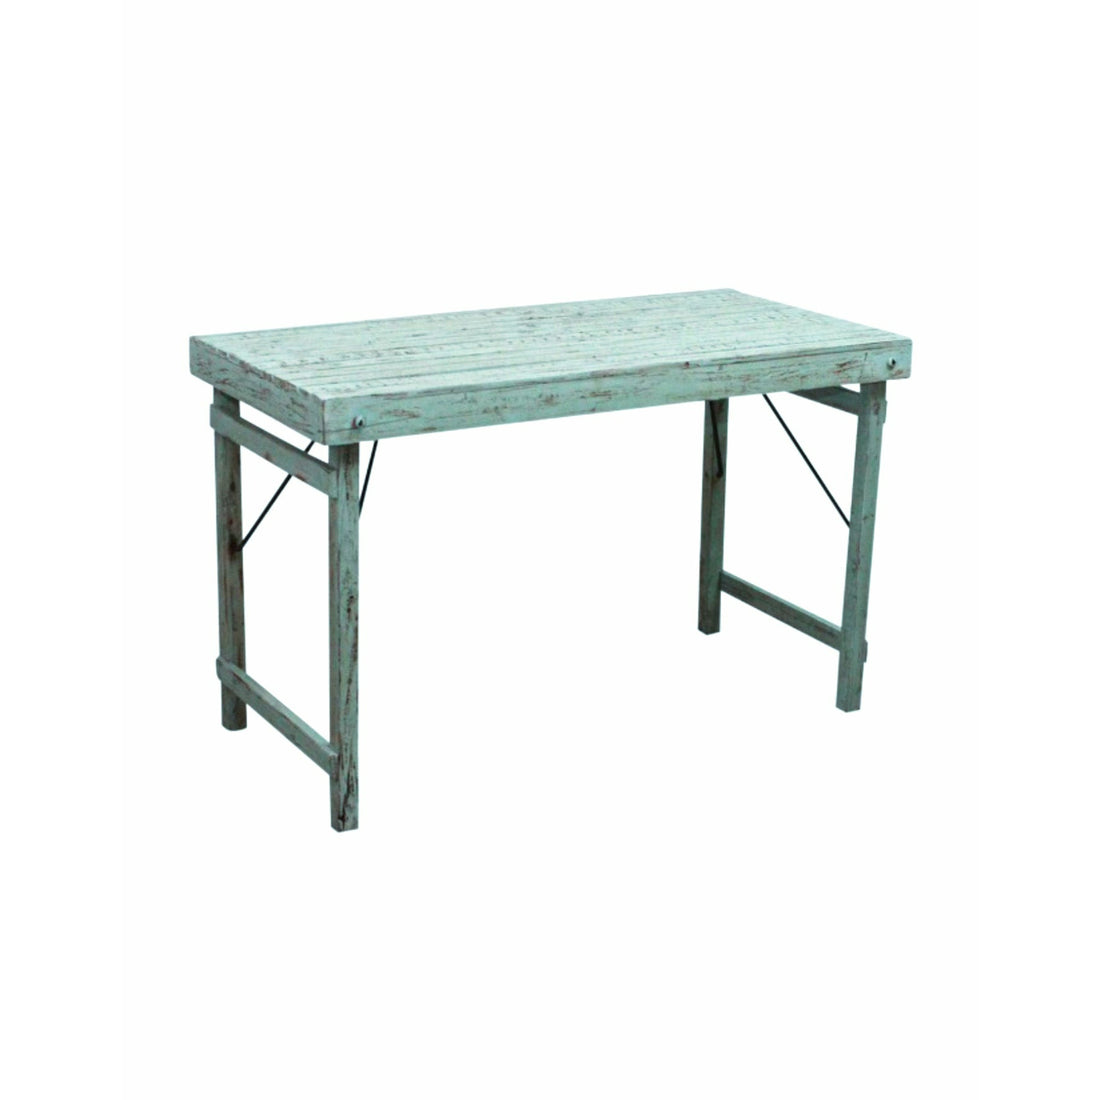 Sjælsø Nordic TABLE IN BLUE FINISH MADE FROM RECYCLED WOOD